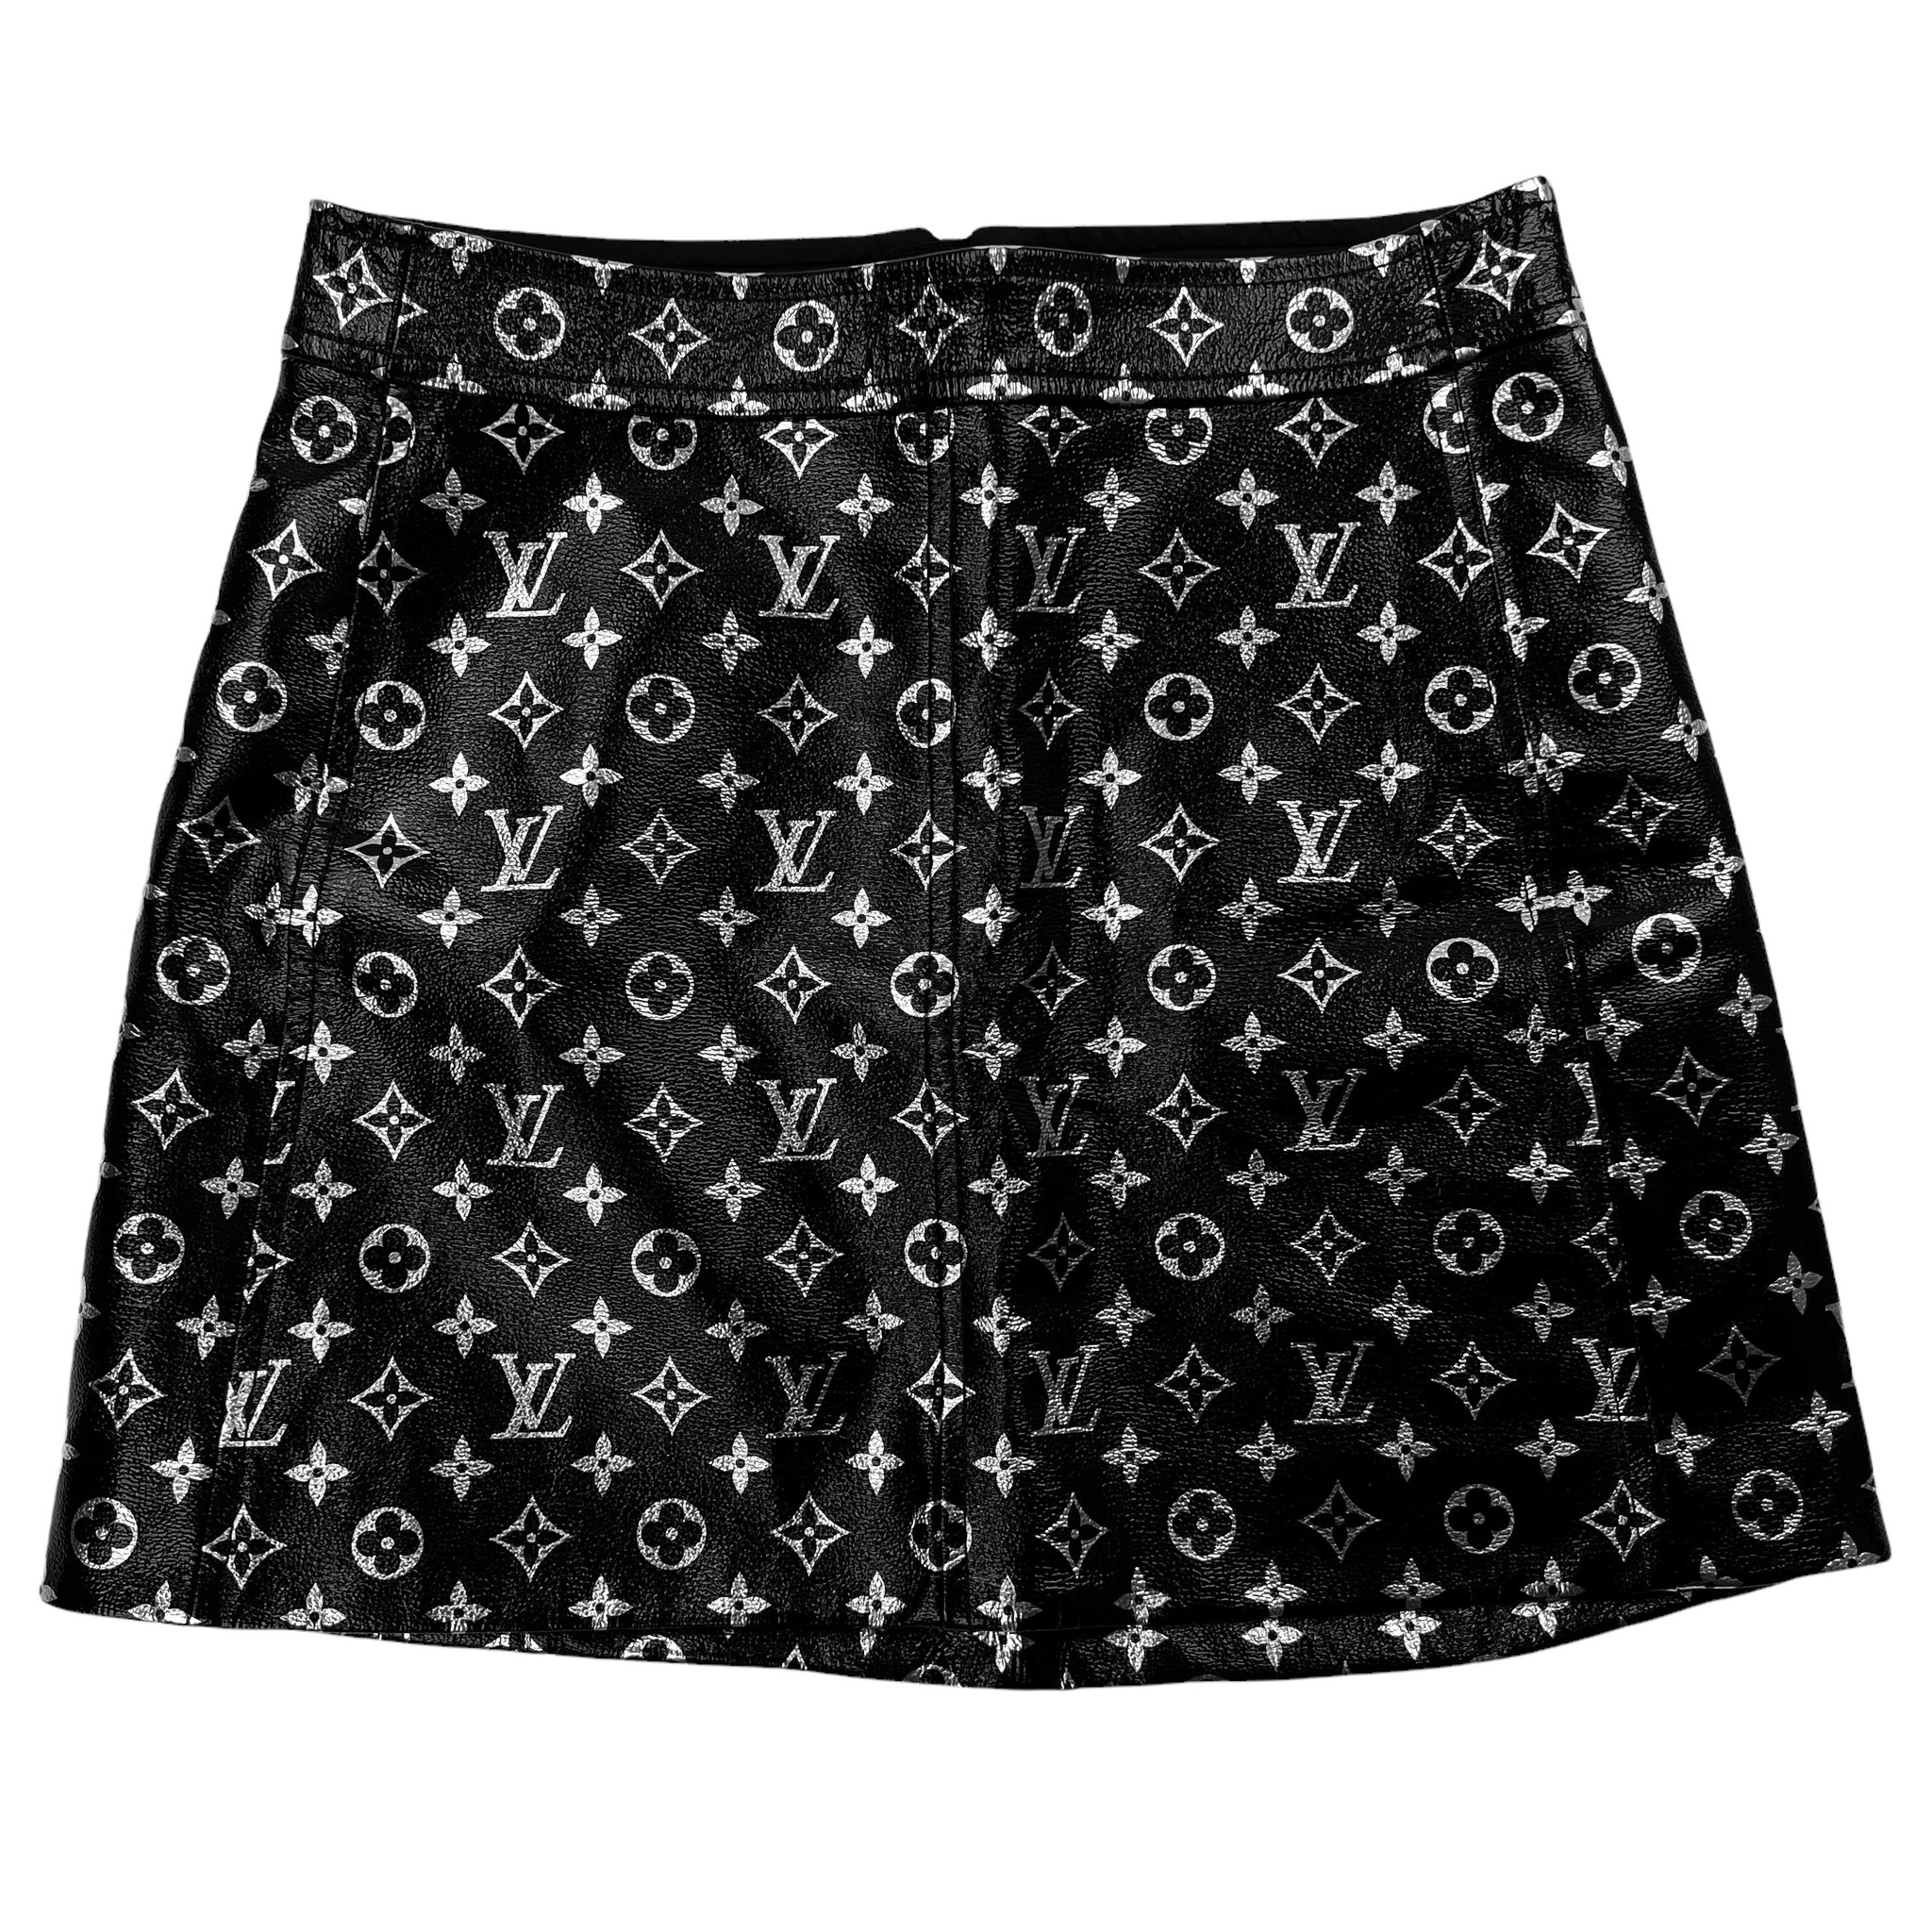 Louis Vuitton Monogram Printed Leather Mini Skirt - Oliver's Archive